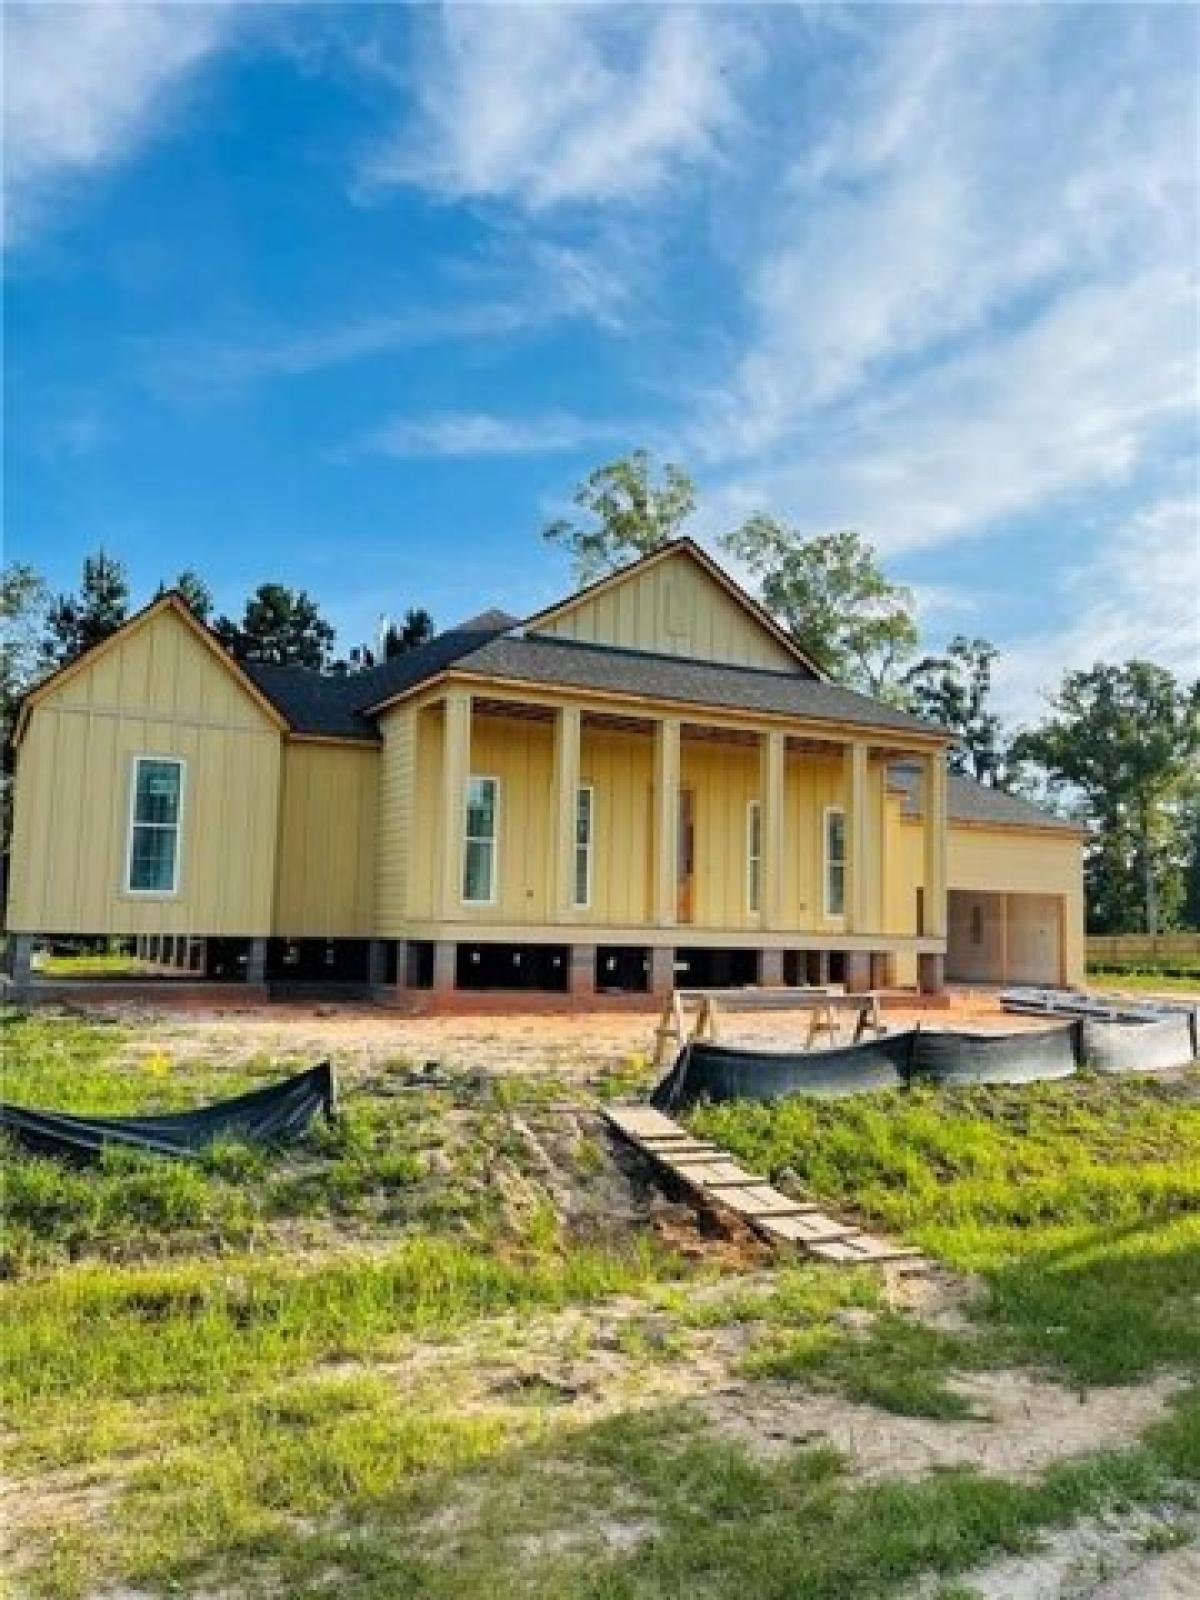 Picture of Home For Sale in Madisonville, Louisiana, United States